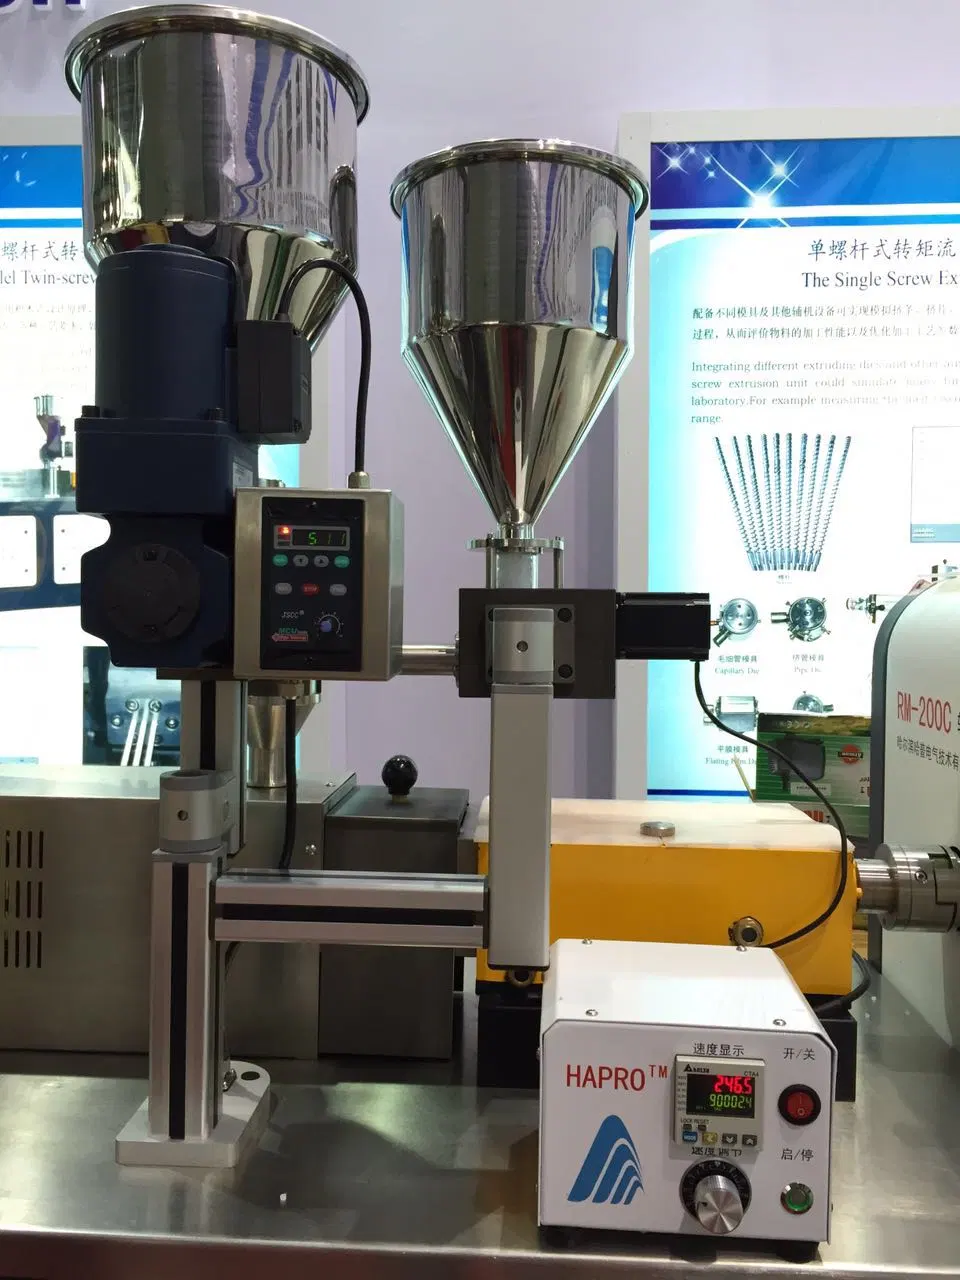 Parallel Co-Rotating Twin Screw Extrusion Test Unit with Torque Measurement System